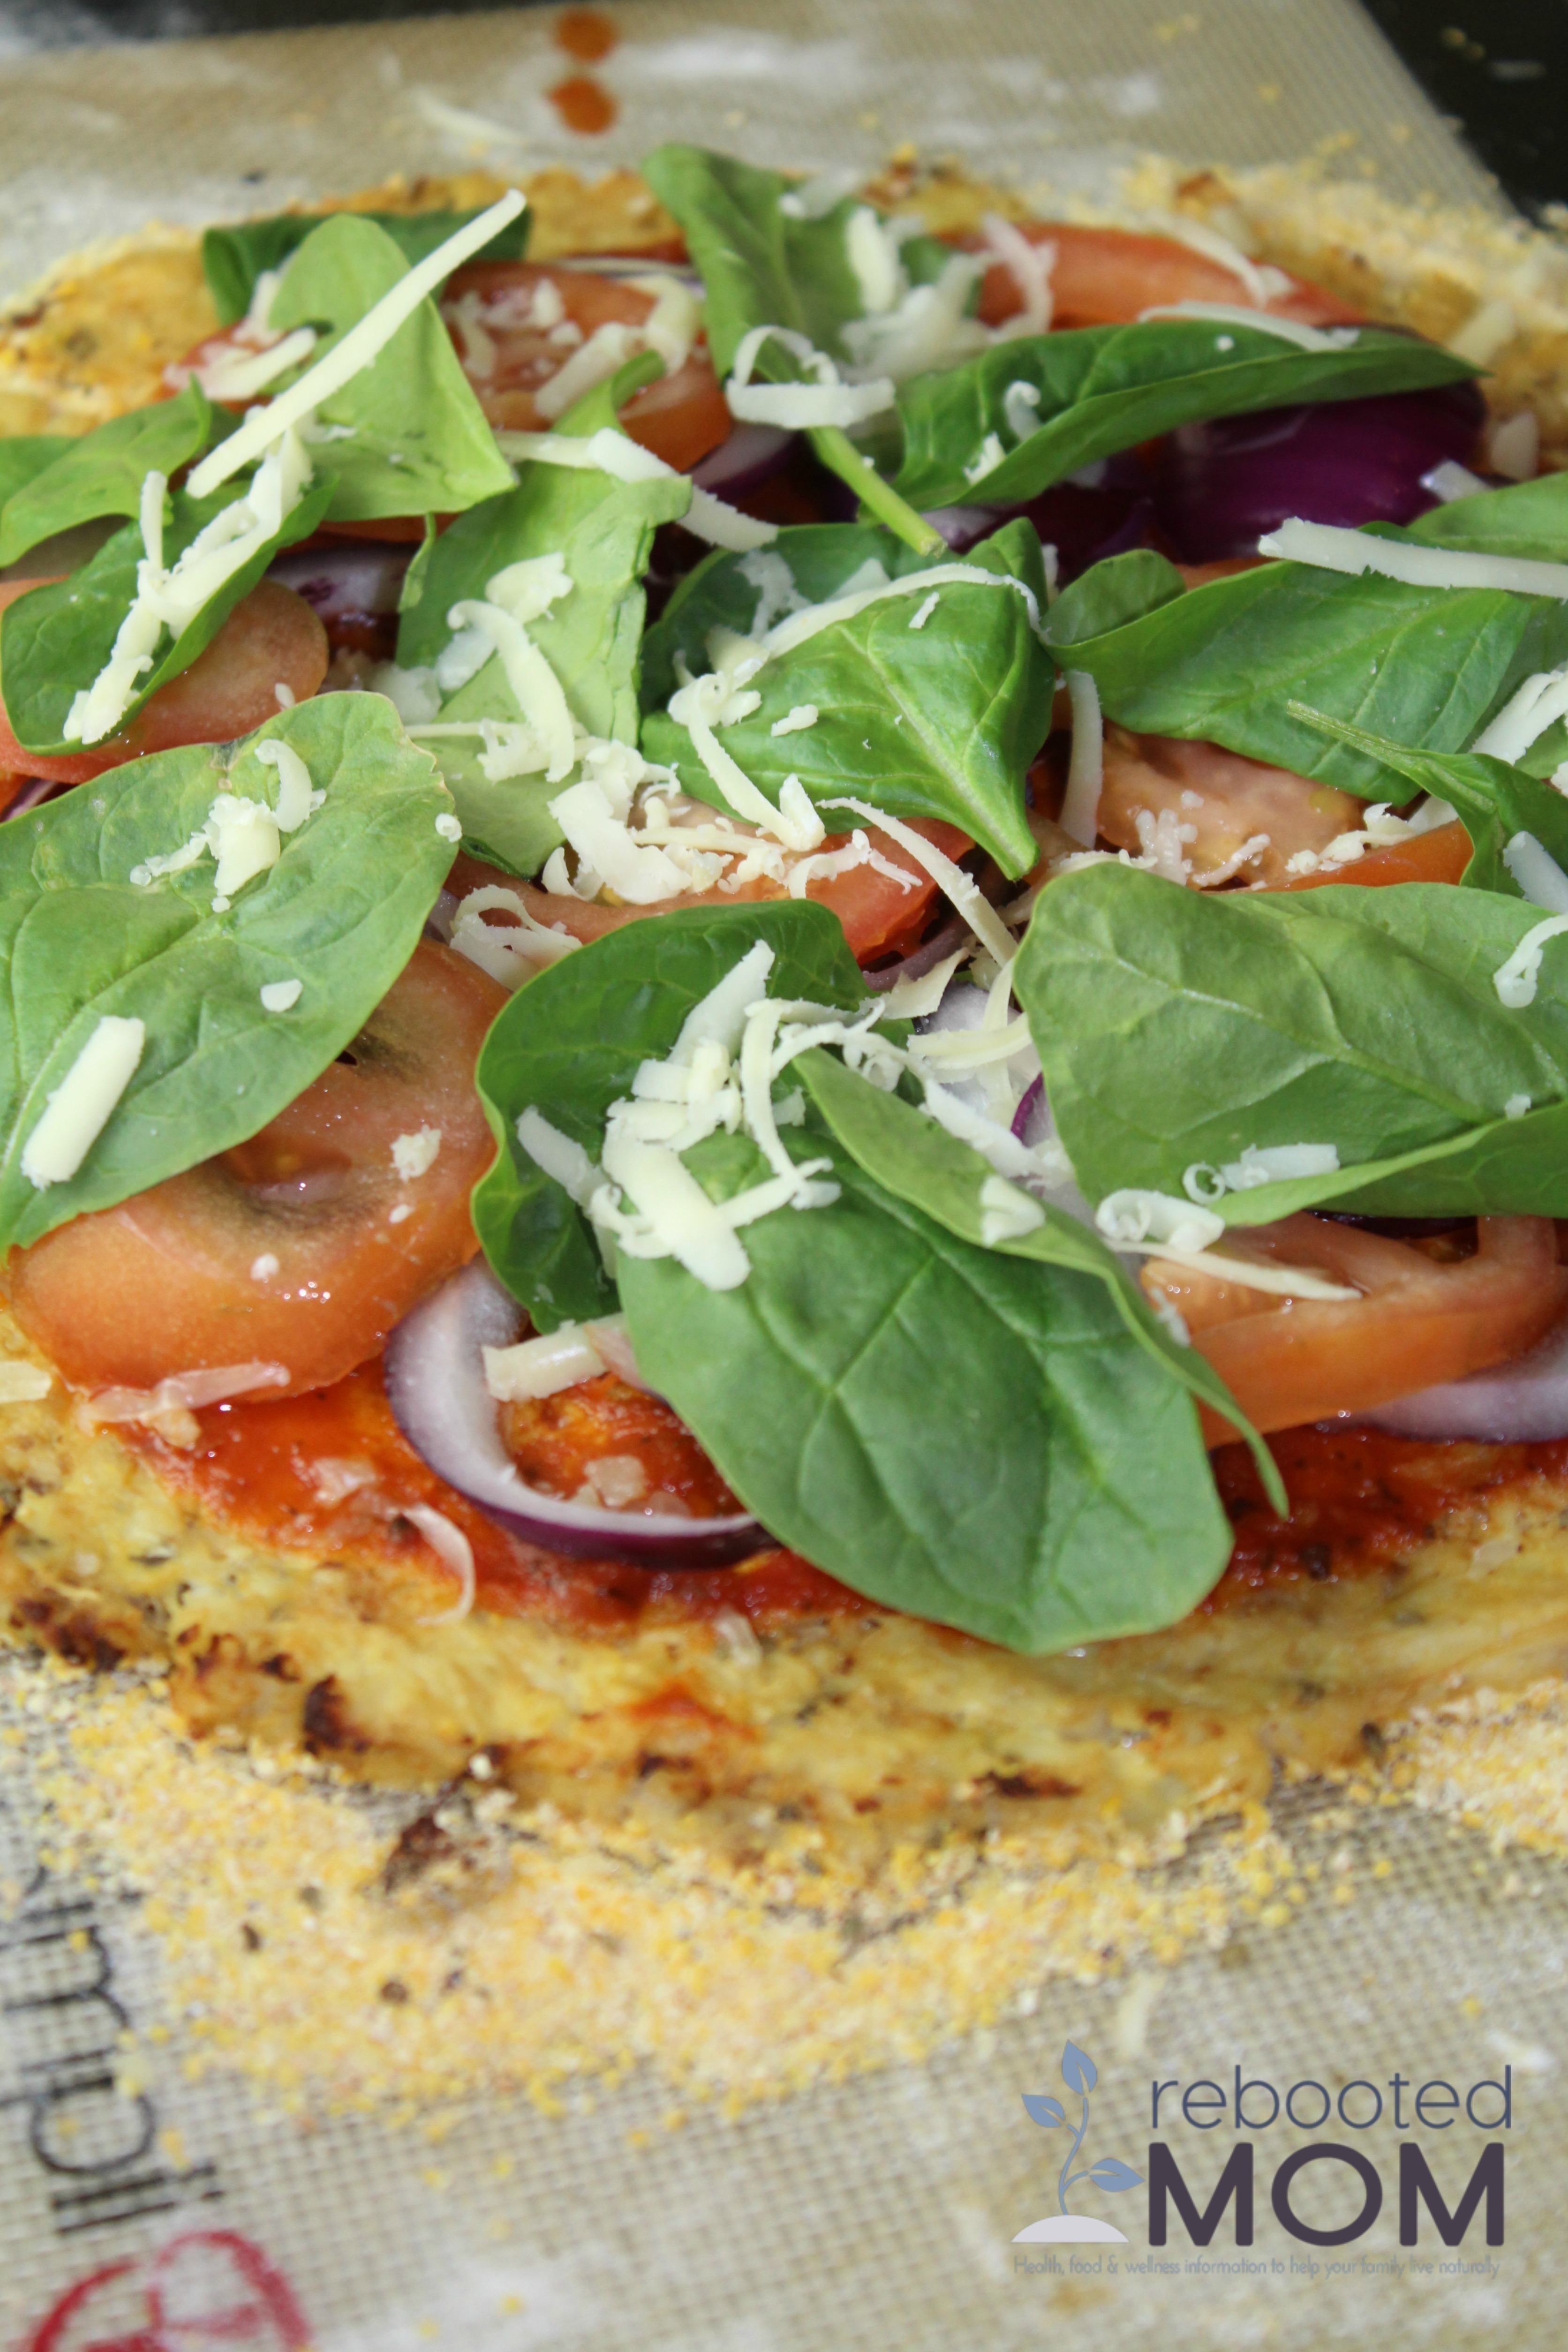 A simple cauliflower pizza crust that contains simple ingredients and easy-to-follow instructions. The finished crust is crispy on the outside and flavorful on the inside.